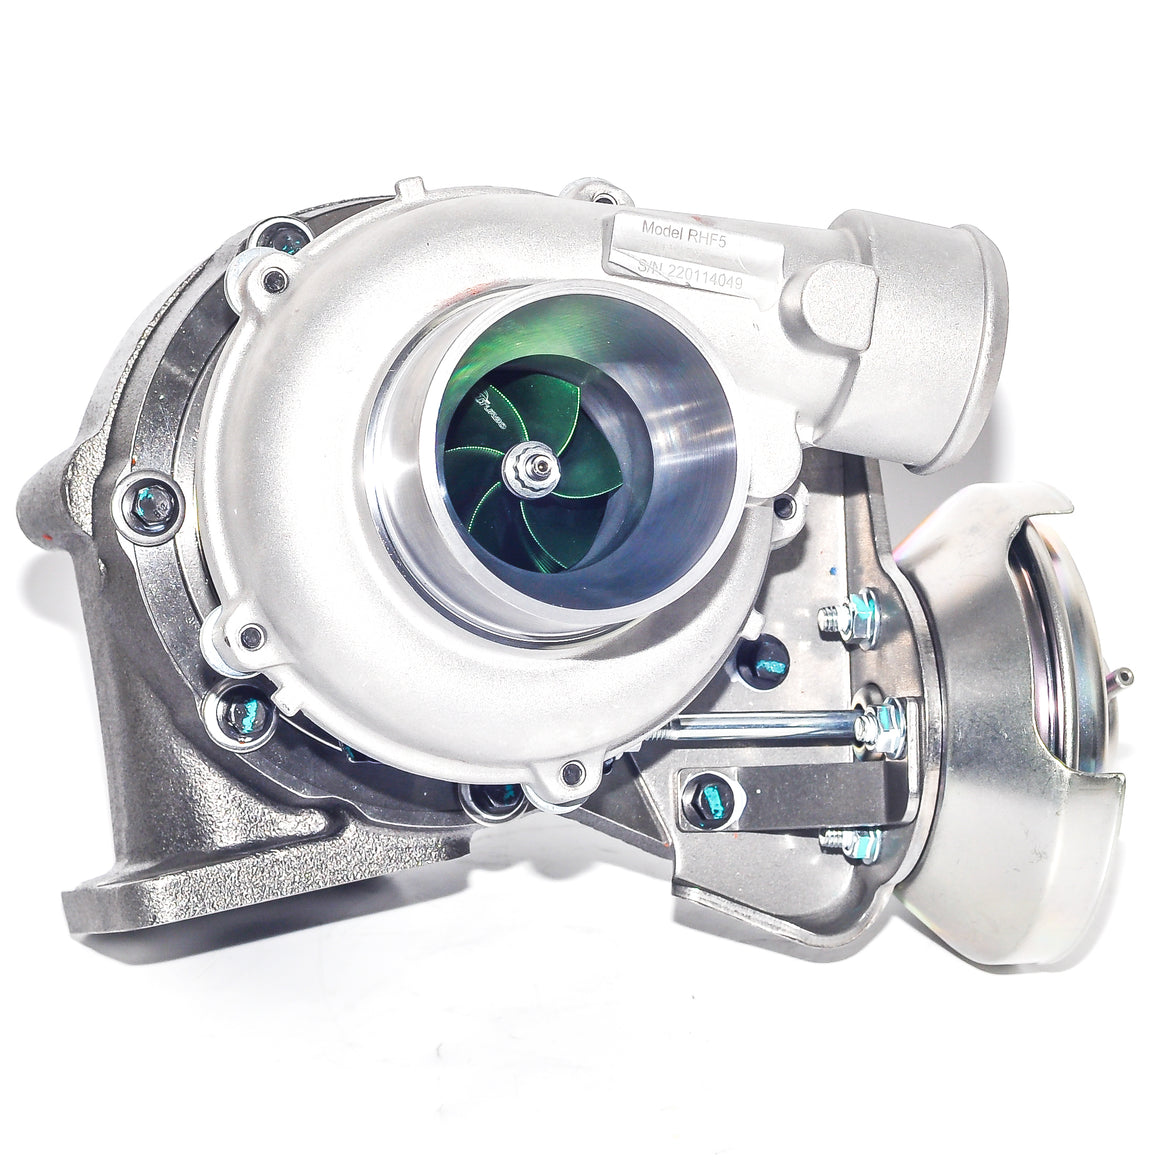 CCT Stage Two Upgrade Hi-Flow Turbocharger To Suit Holden Rodeo / Isuzu D-Max 3.0L 4JJ1T VIEZ